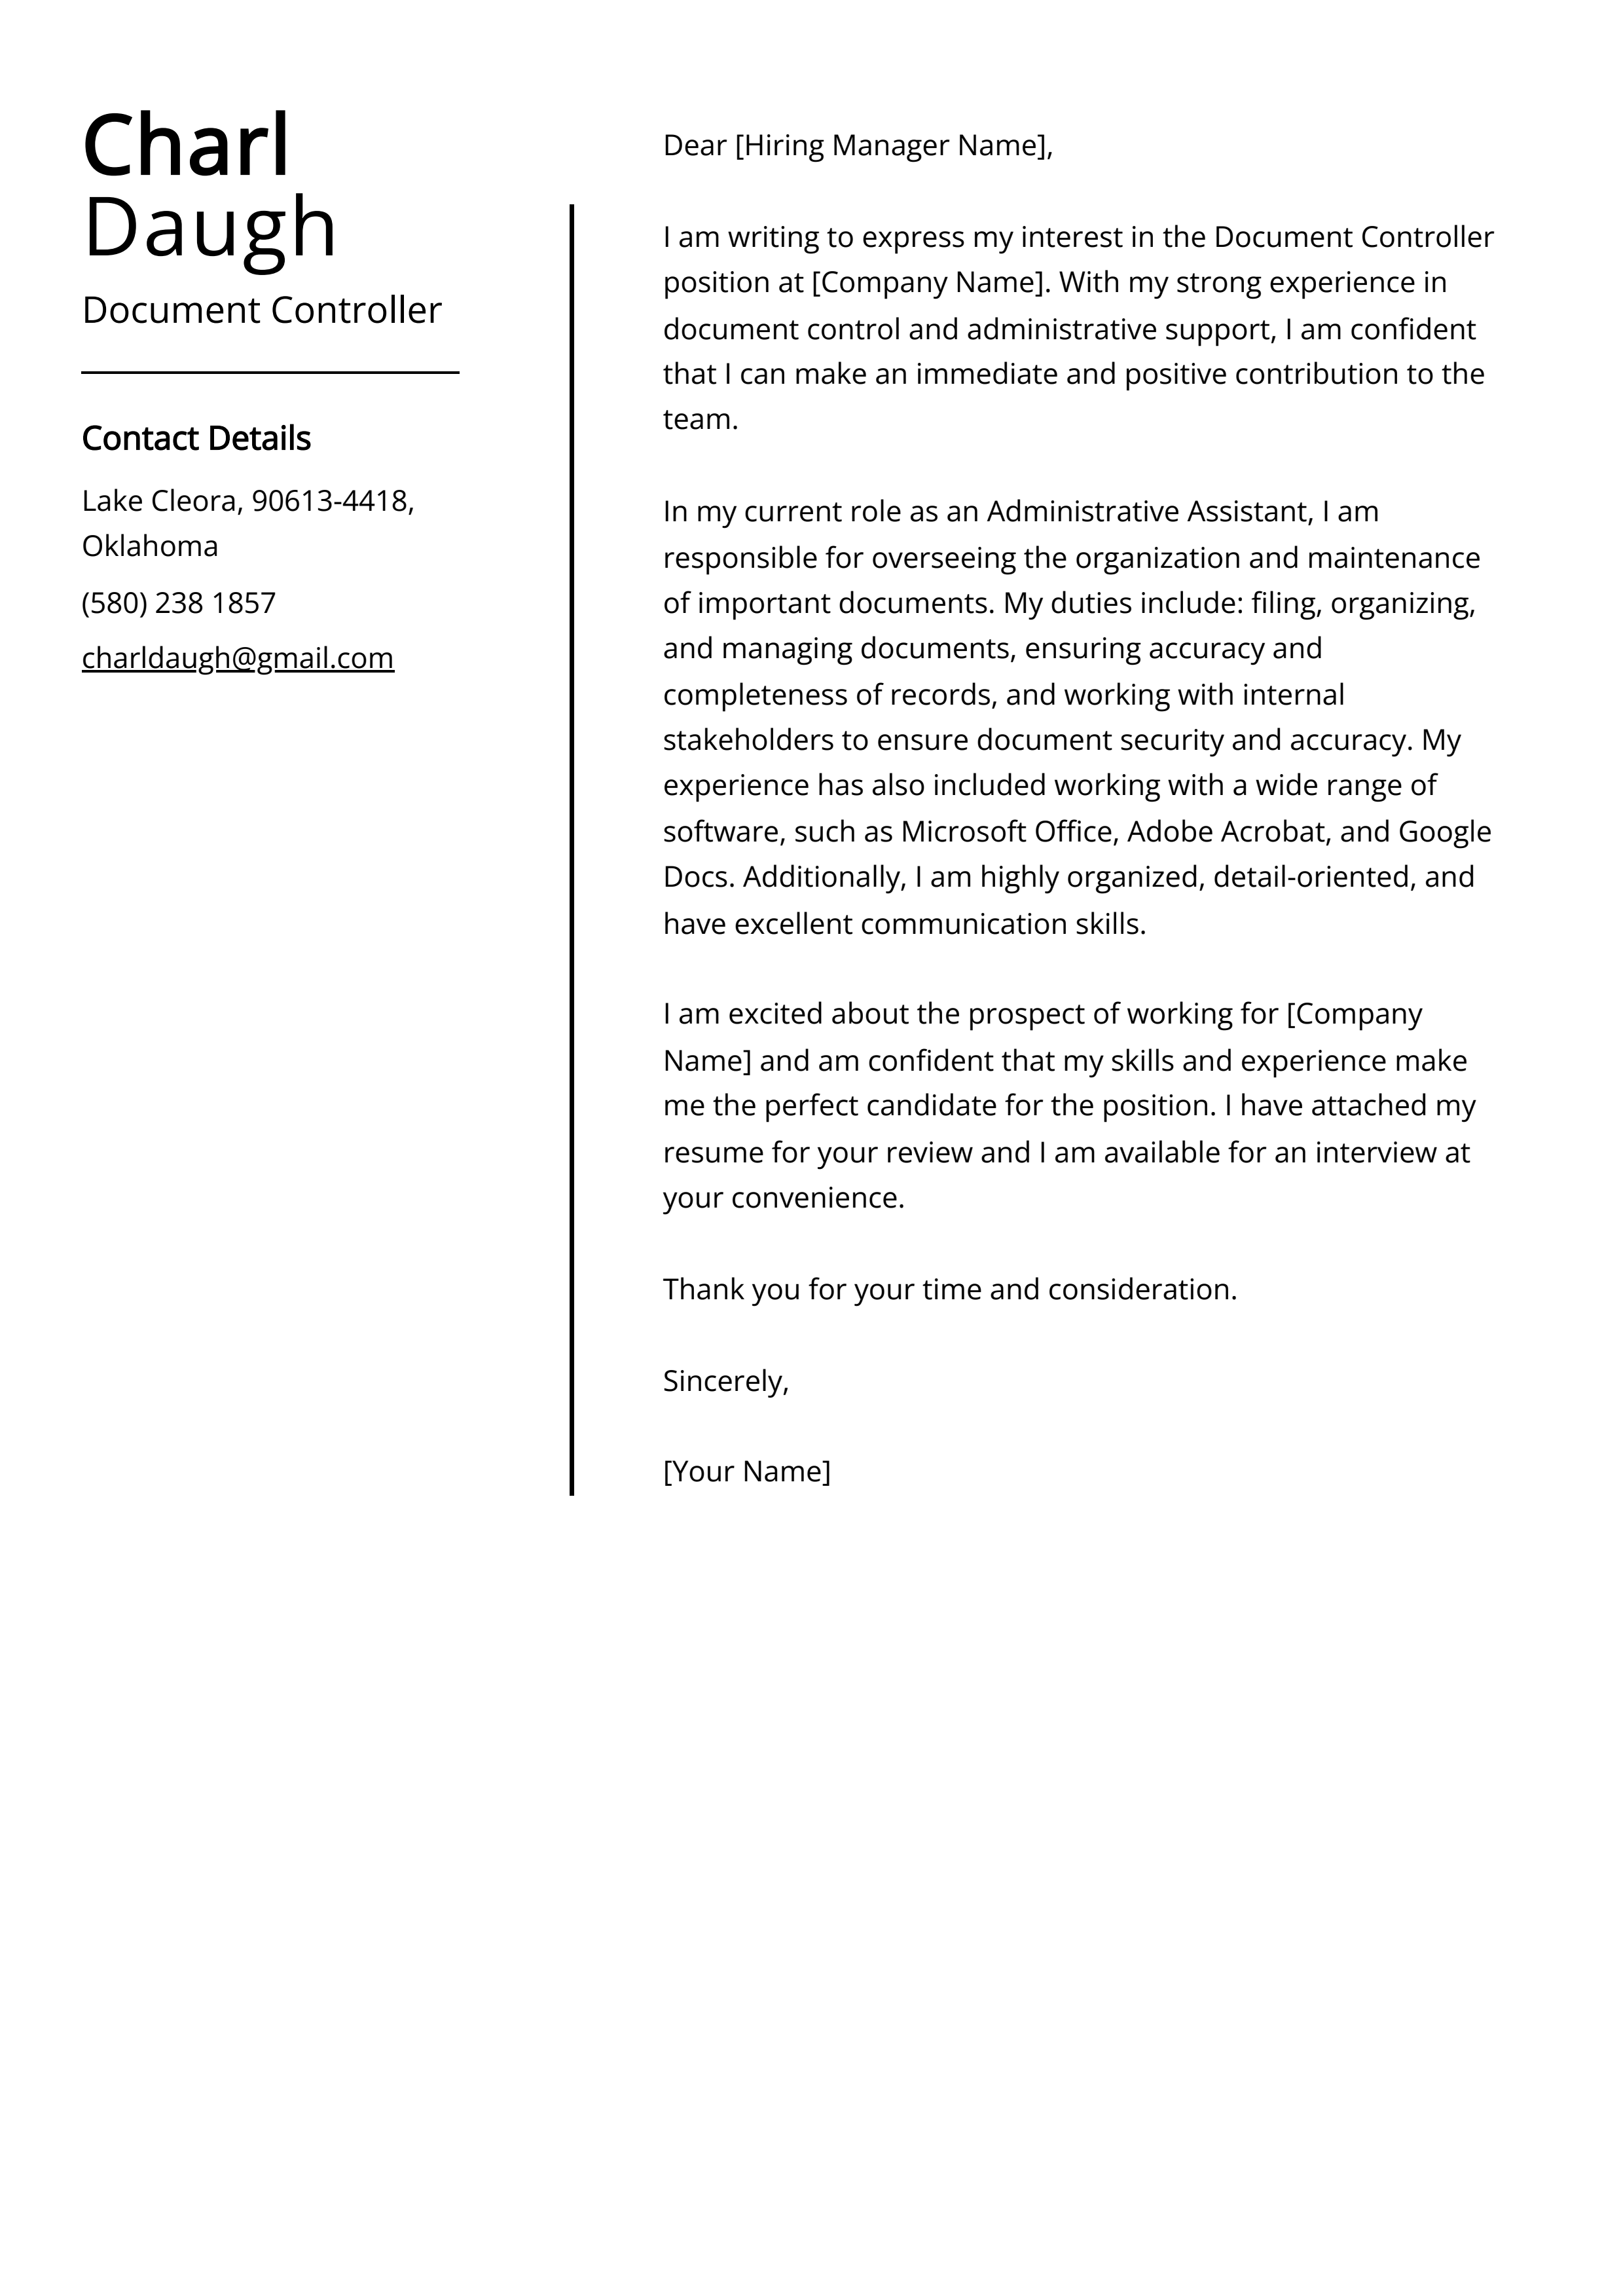 Document Controller Cover Letter Example